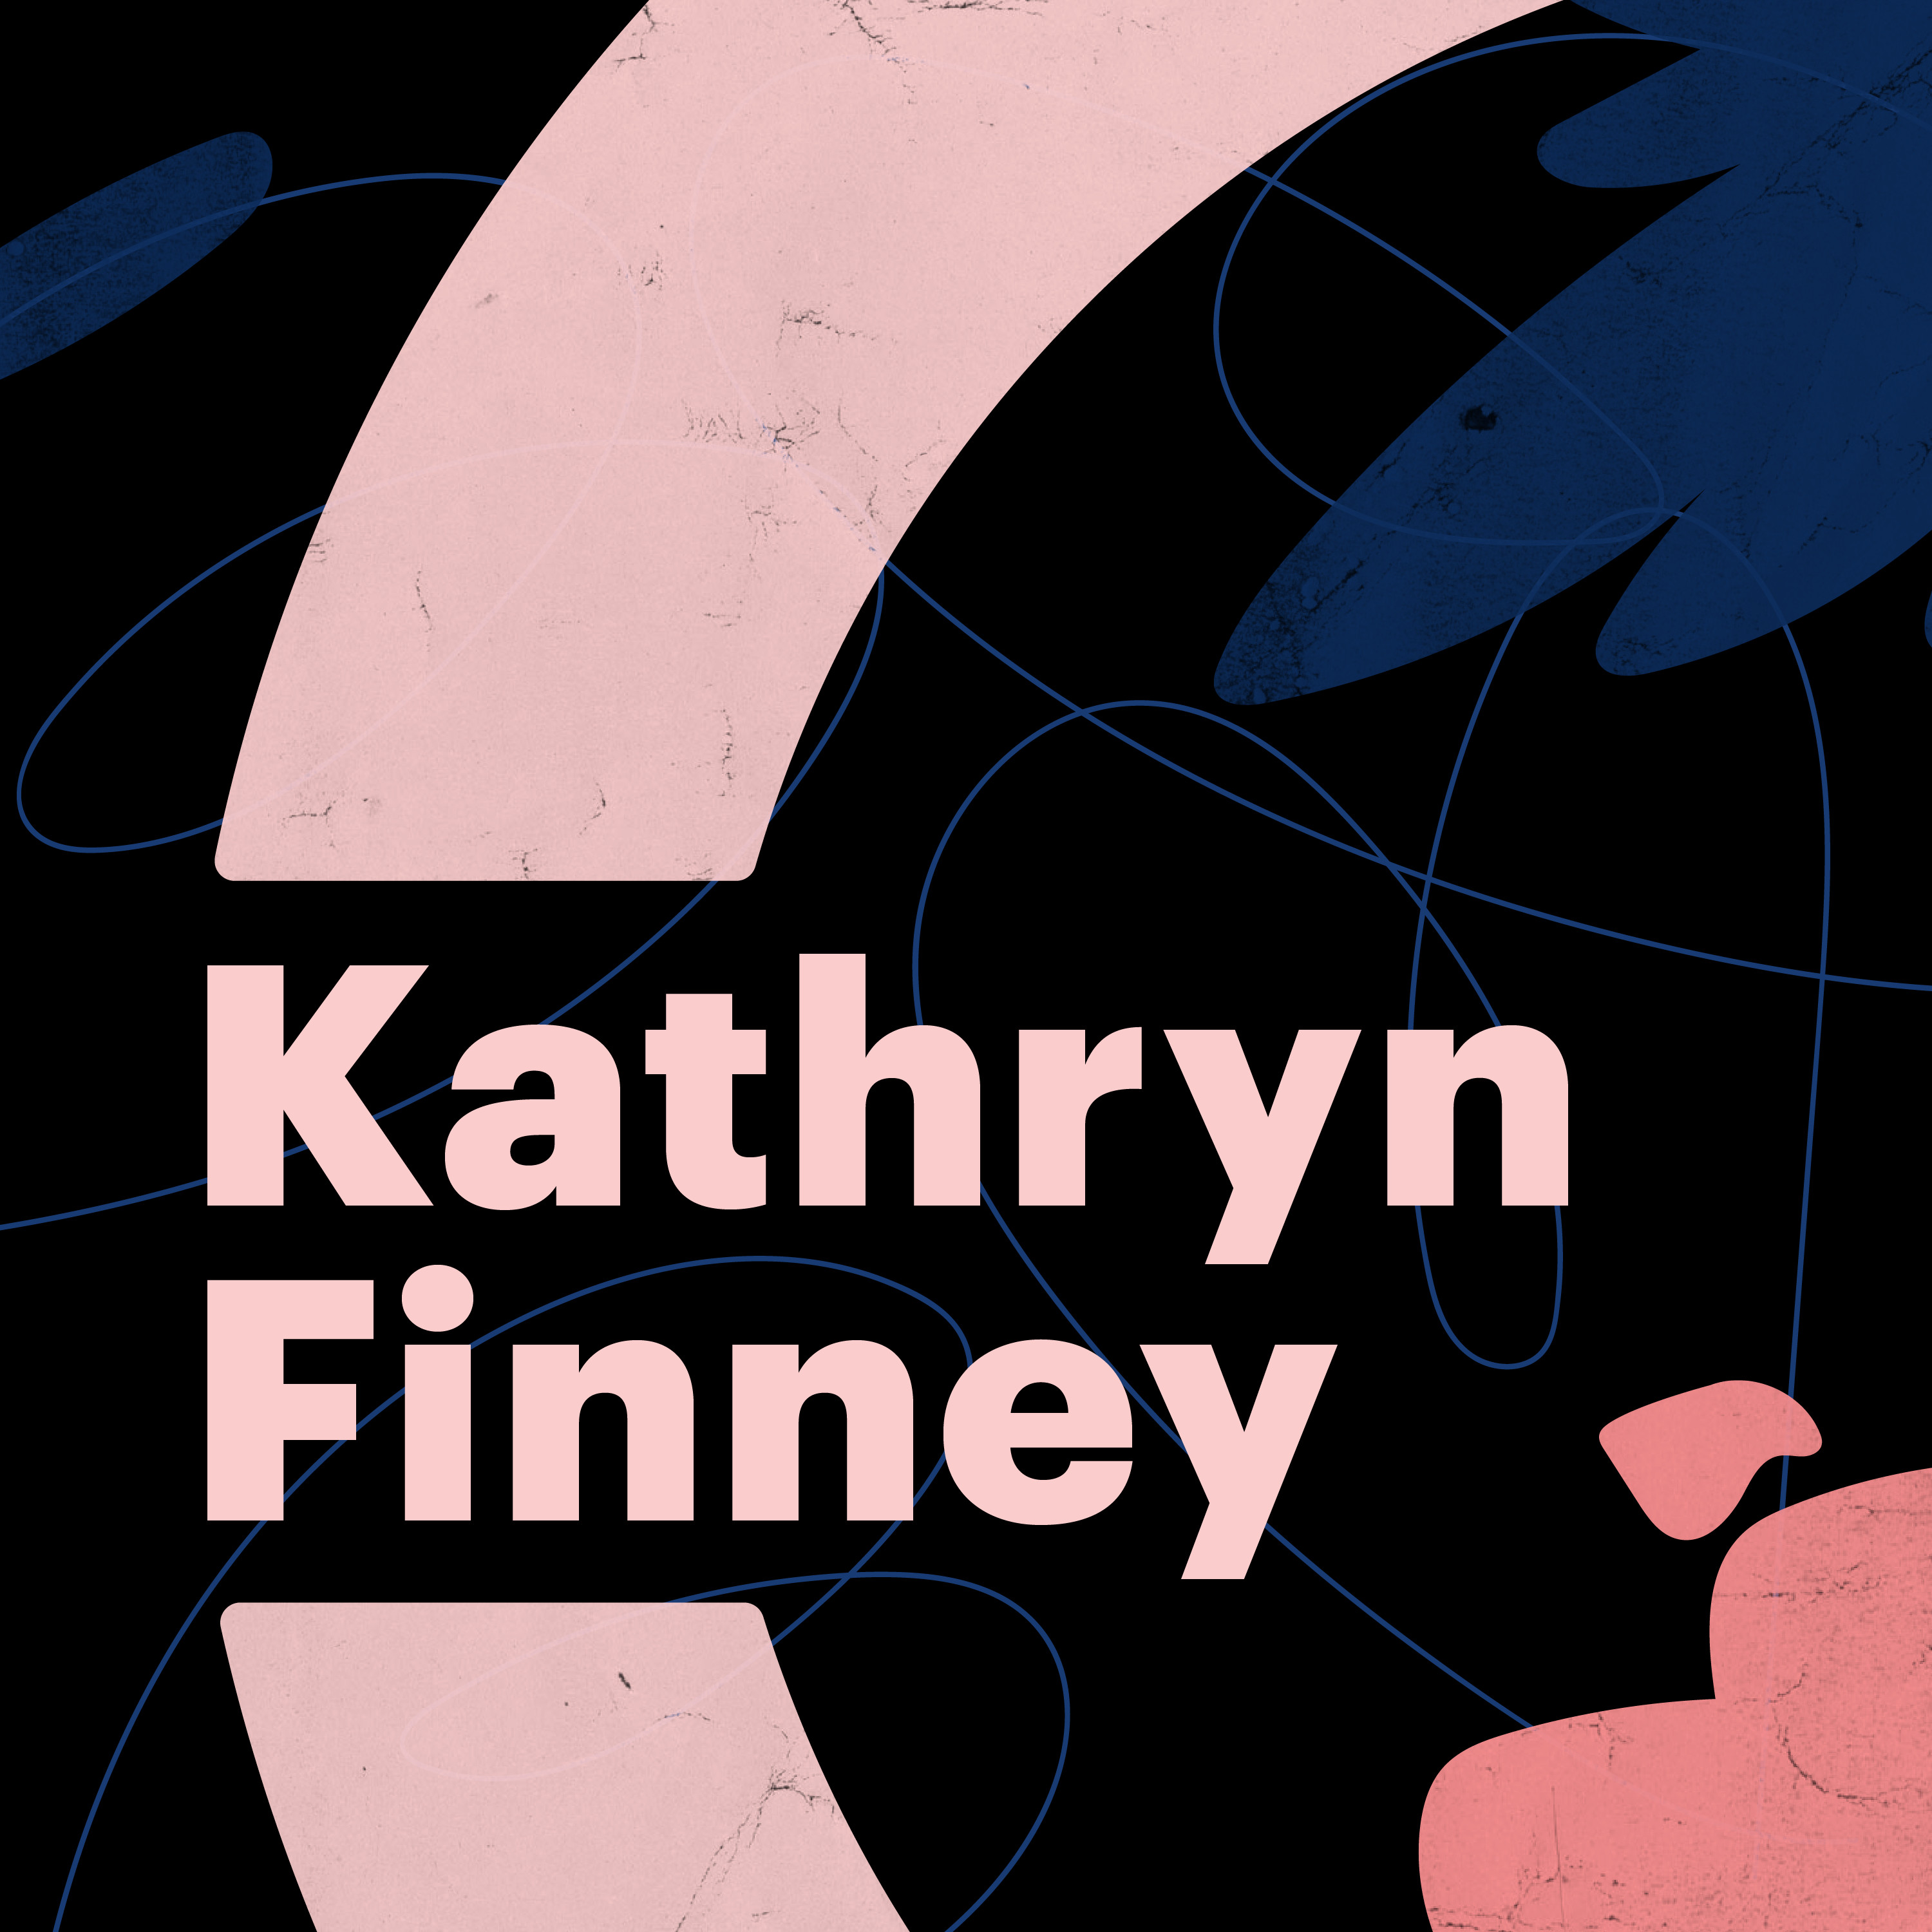  Kathryn Finney on intersectionality and using your privilege for good